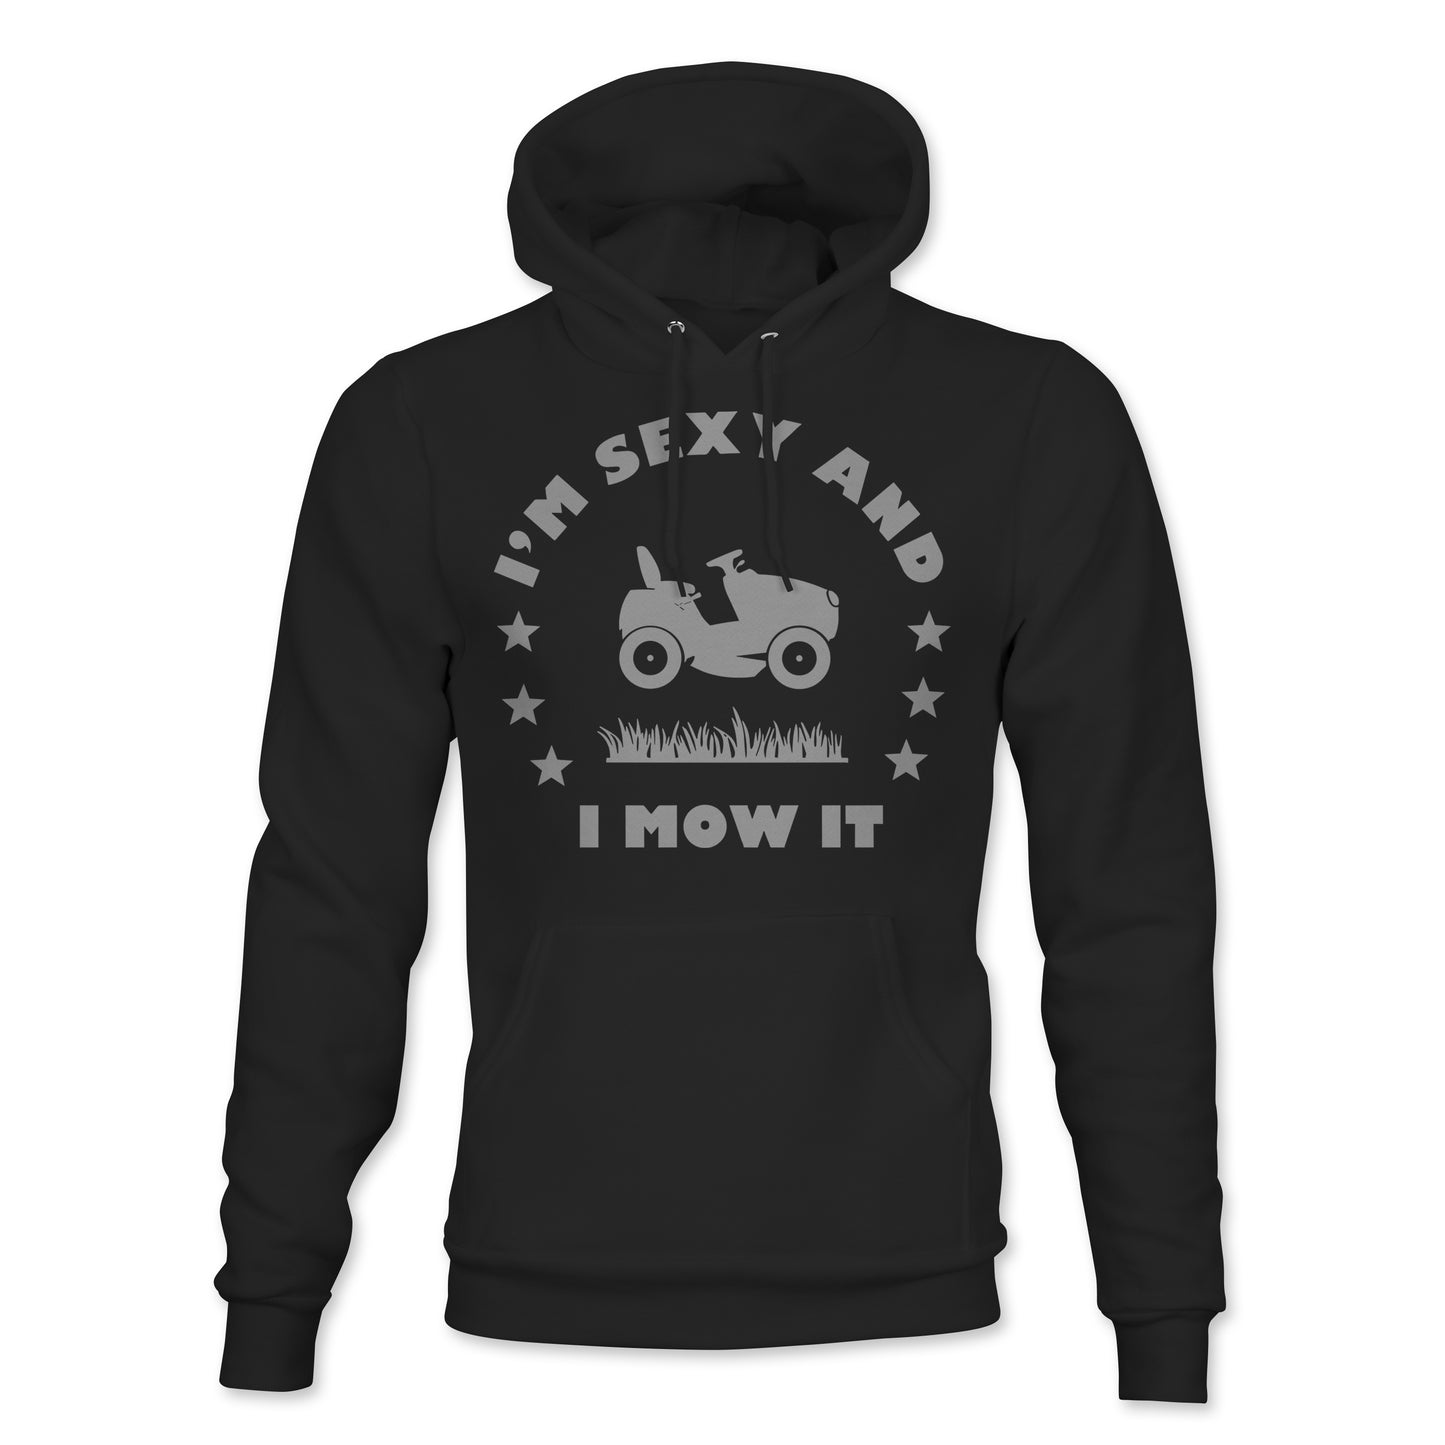 Sexy and I Mow It Hoodie